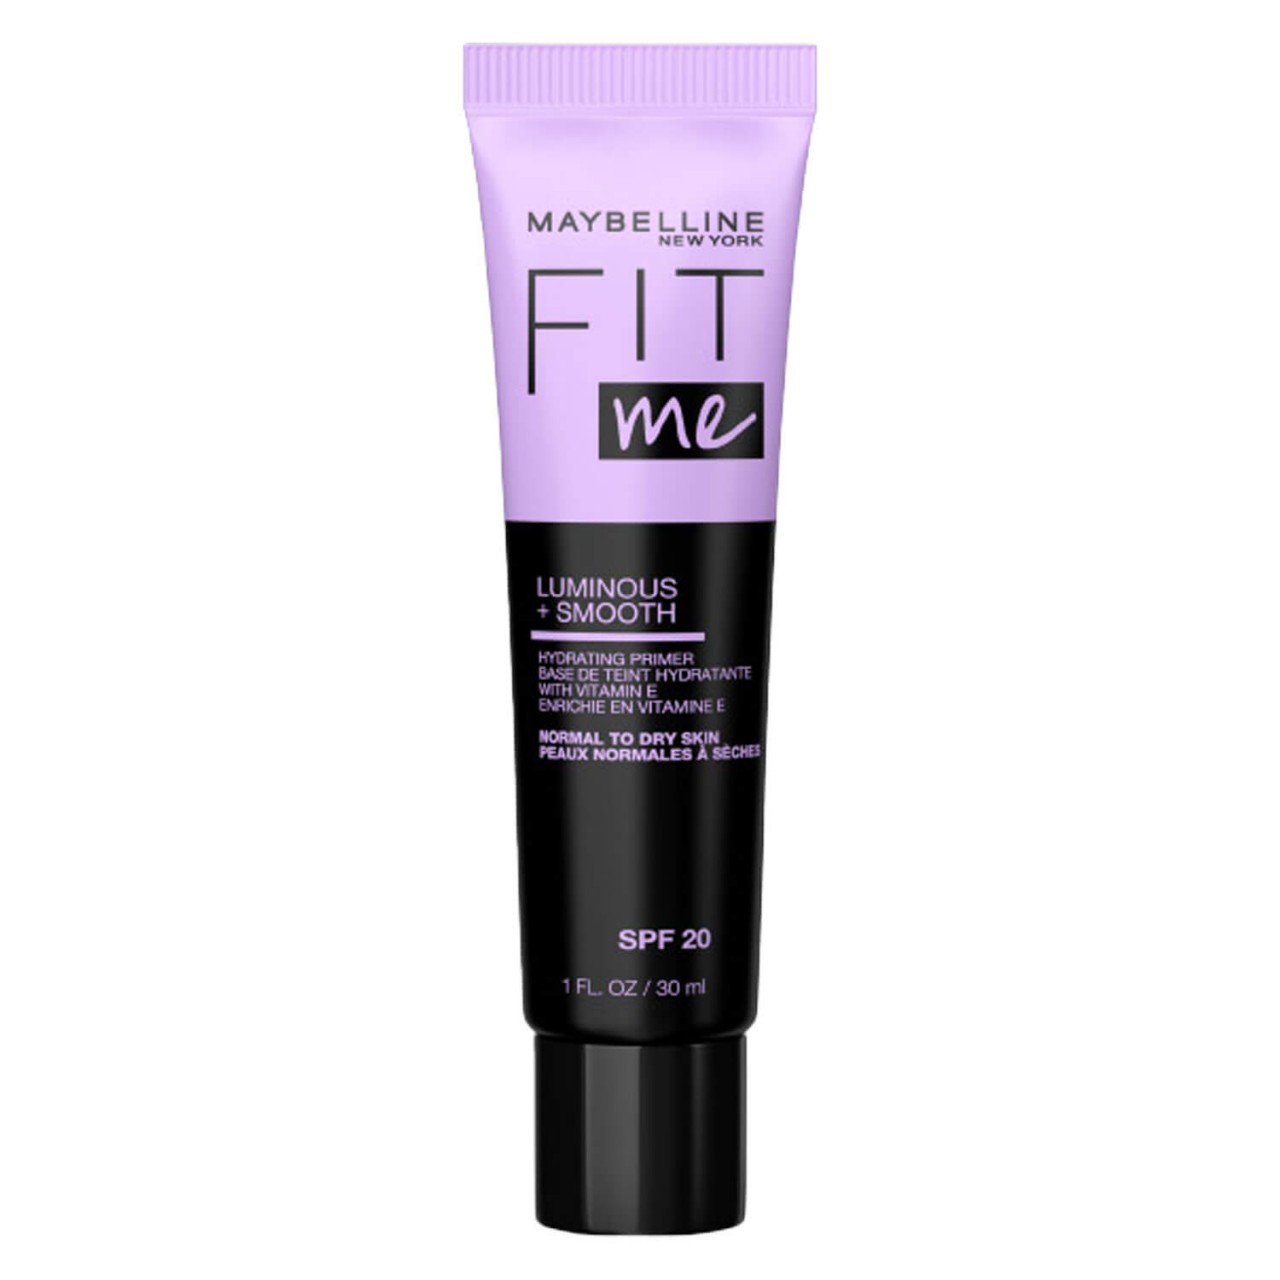 Maybelline NY Primer - Fit Me Primer Luminous & Smooth von Maybelline New York